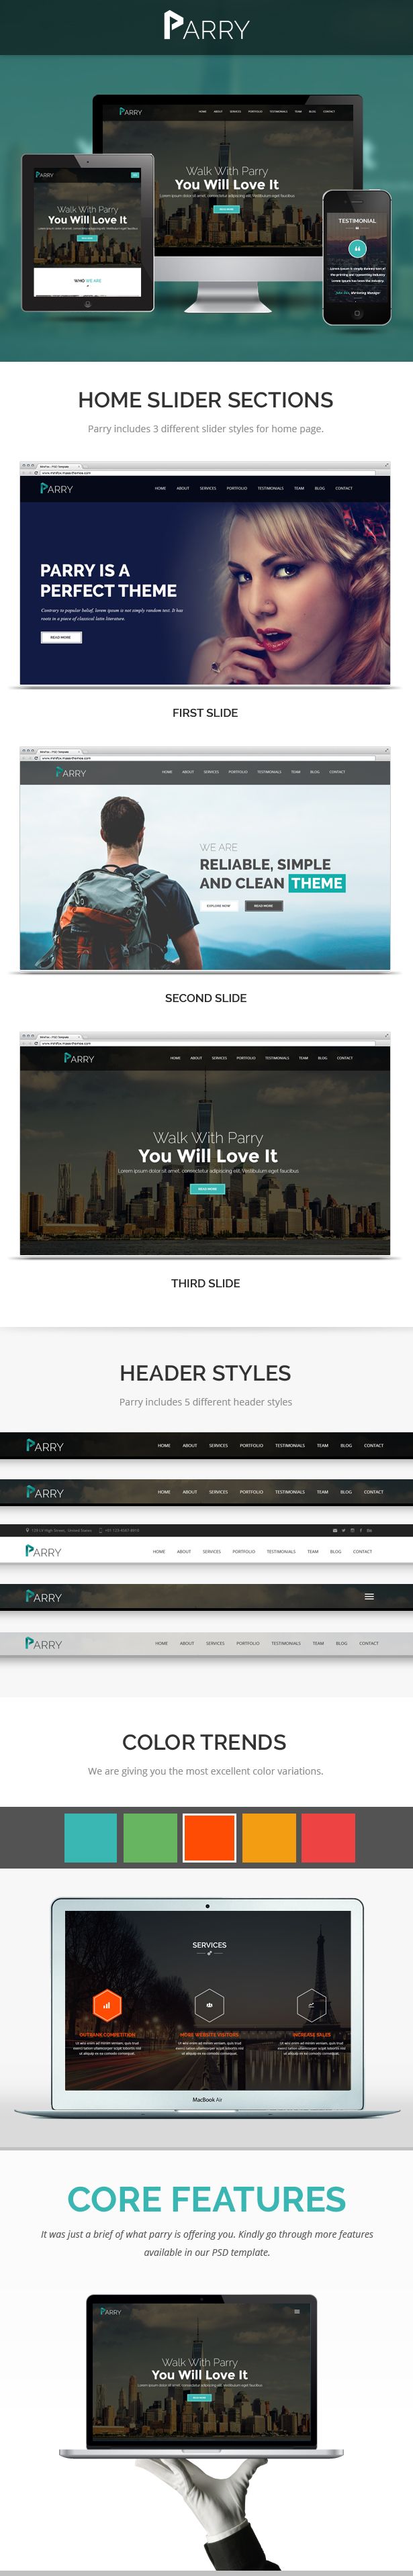 Parry - One Page Premium PSD Template - 1